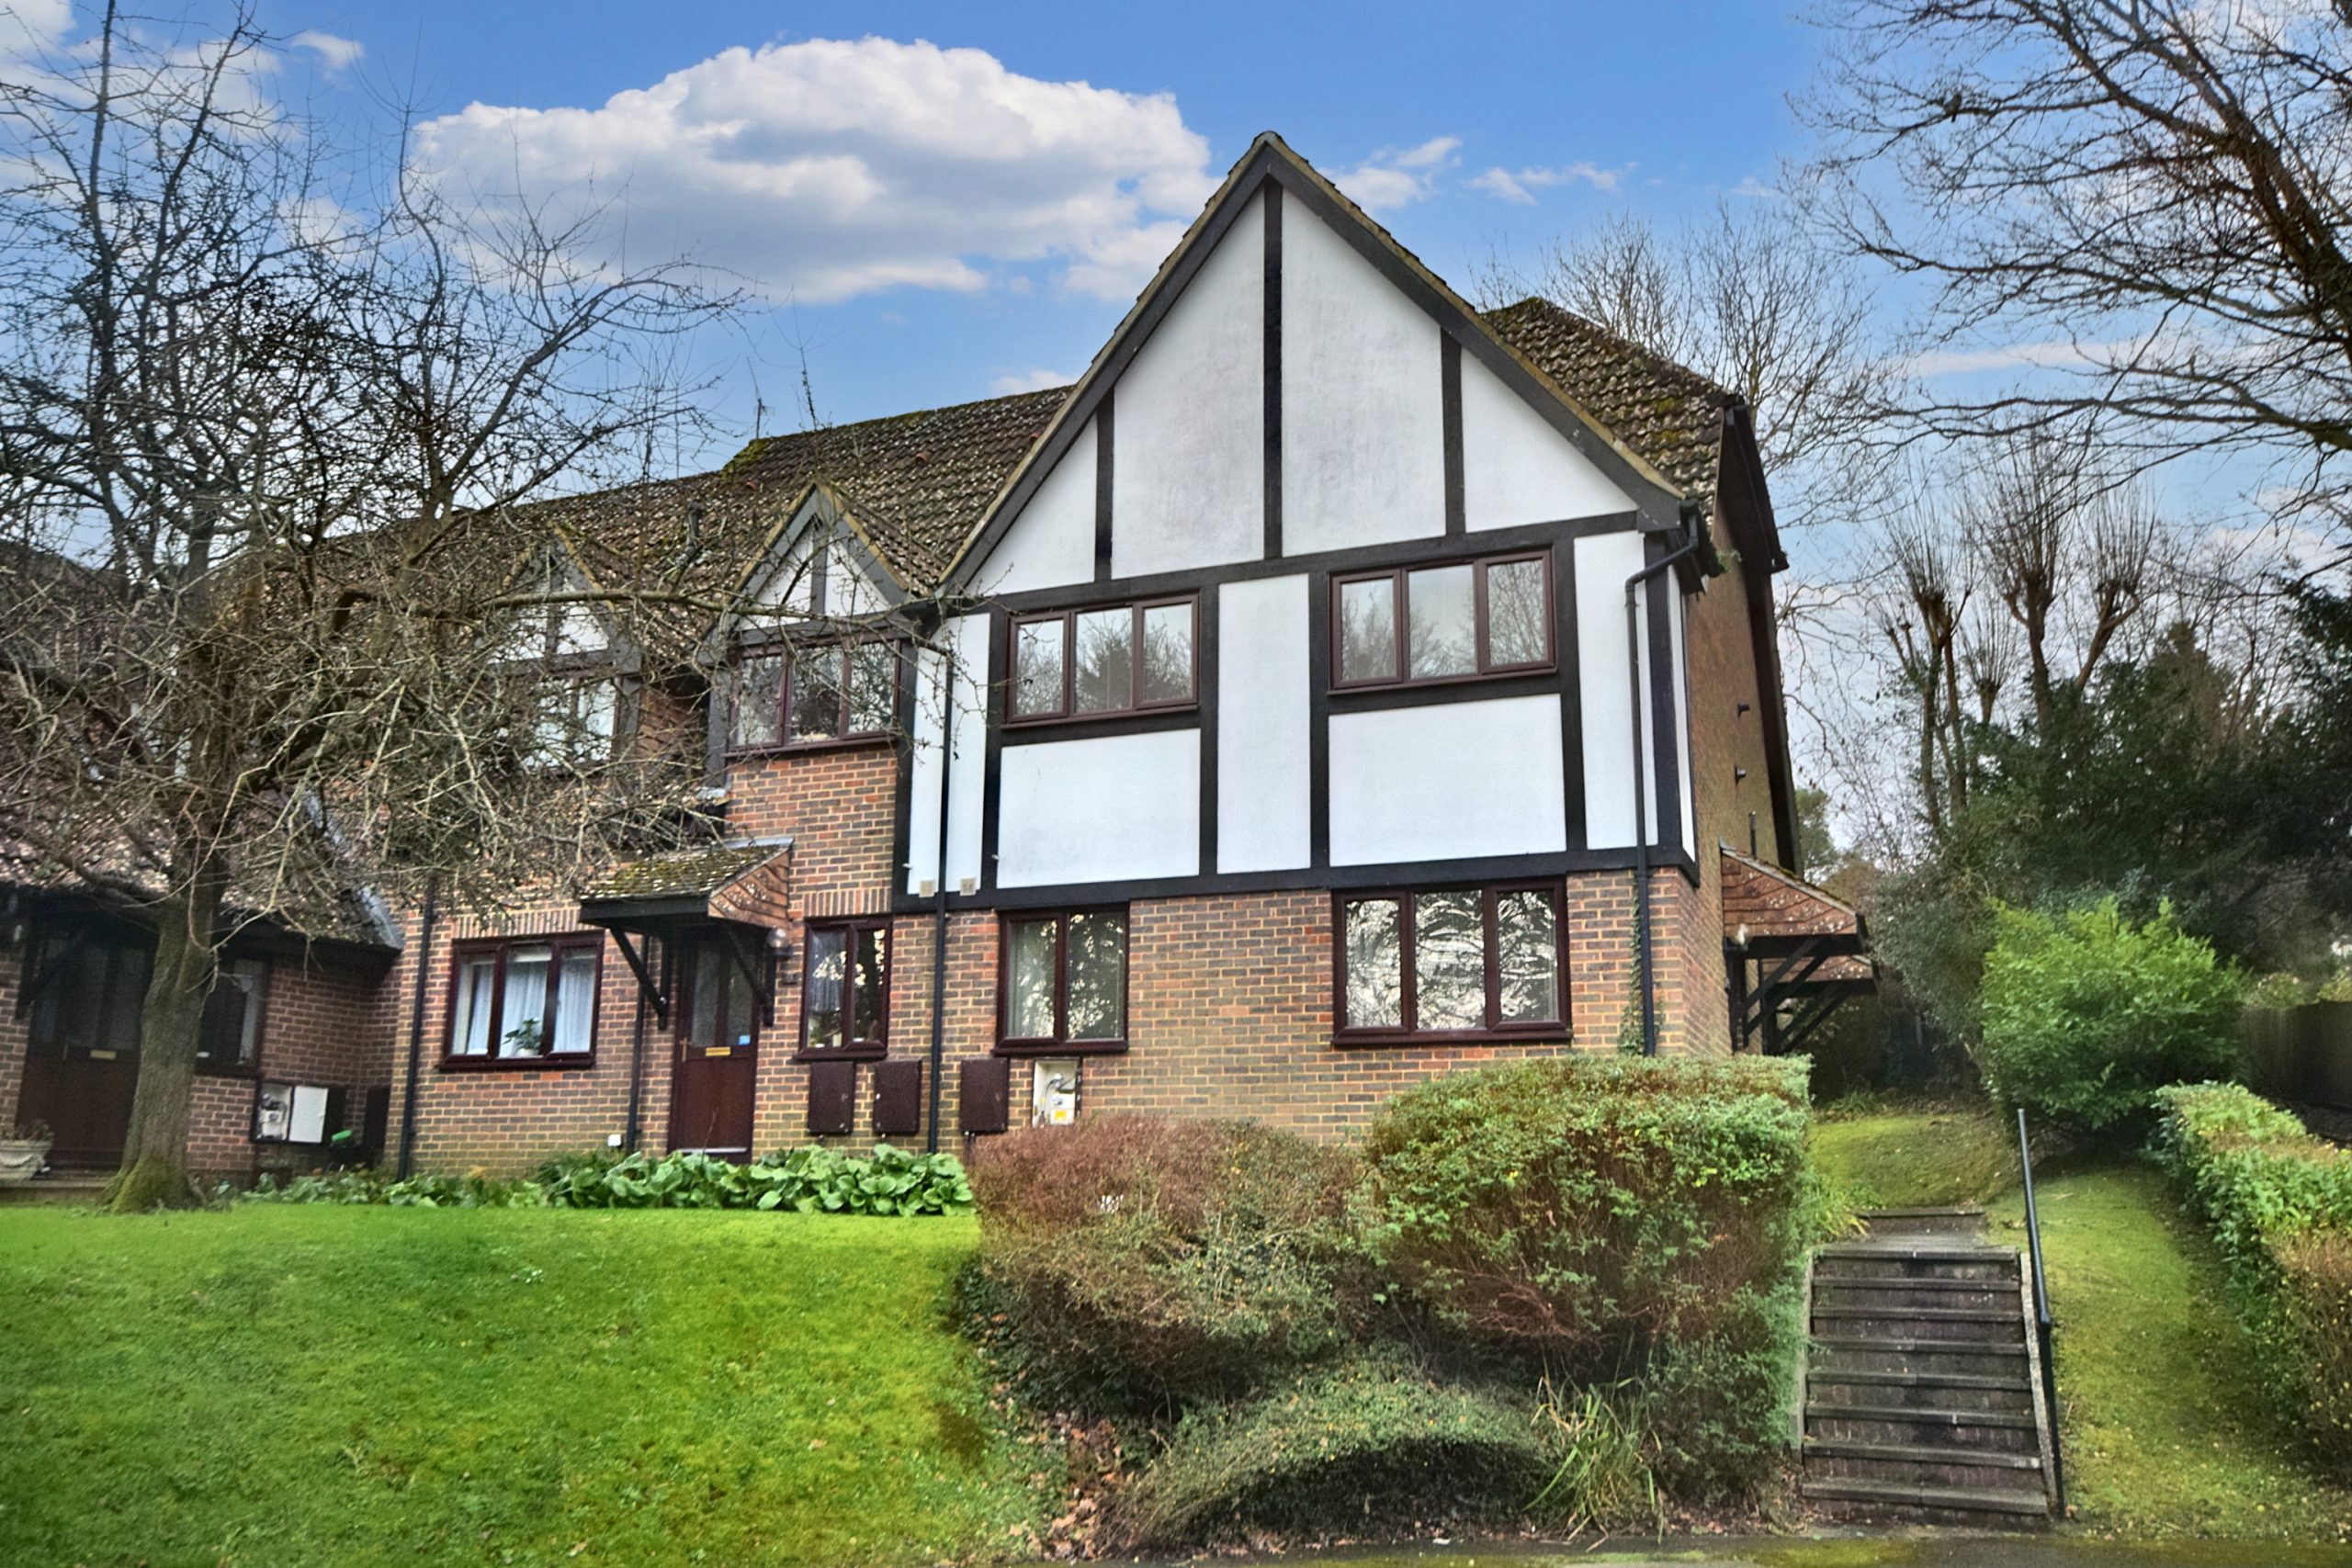 Busy day on Lettings – Let agreed today in Farnham at £1,200 pcm